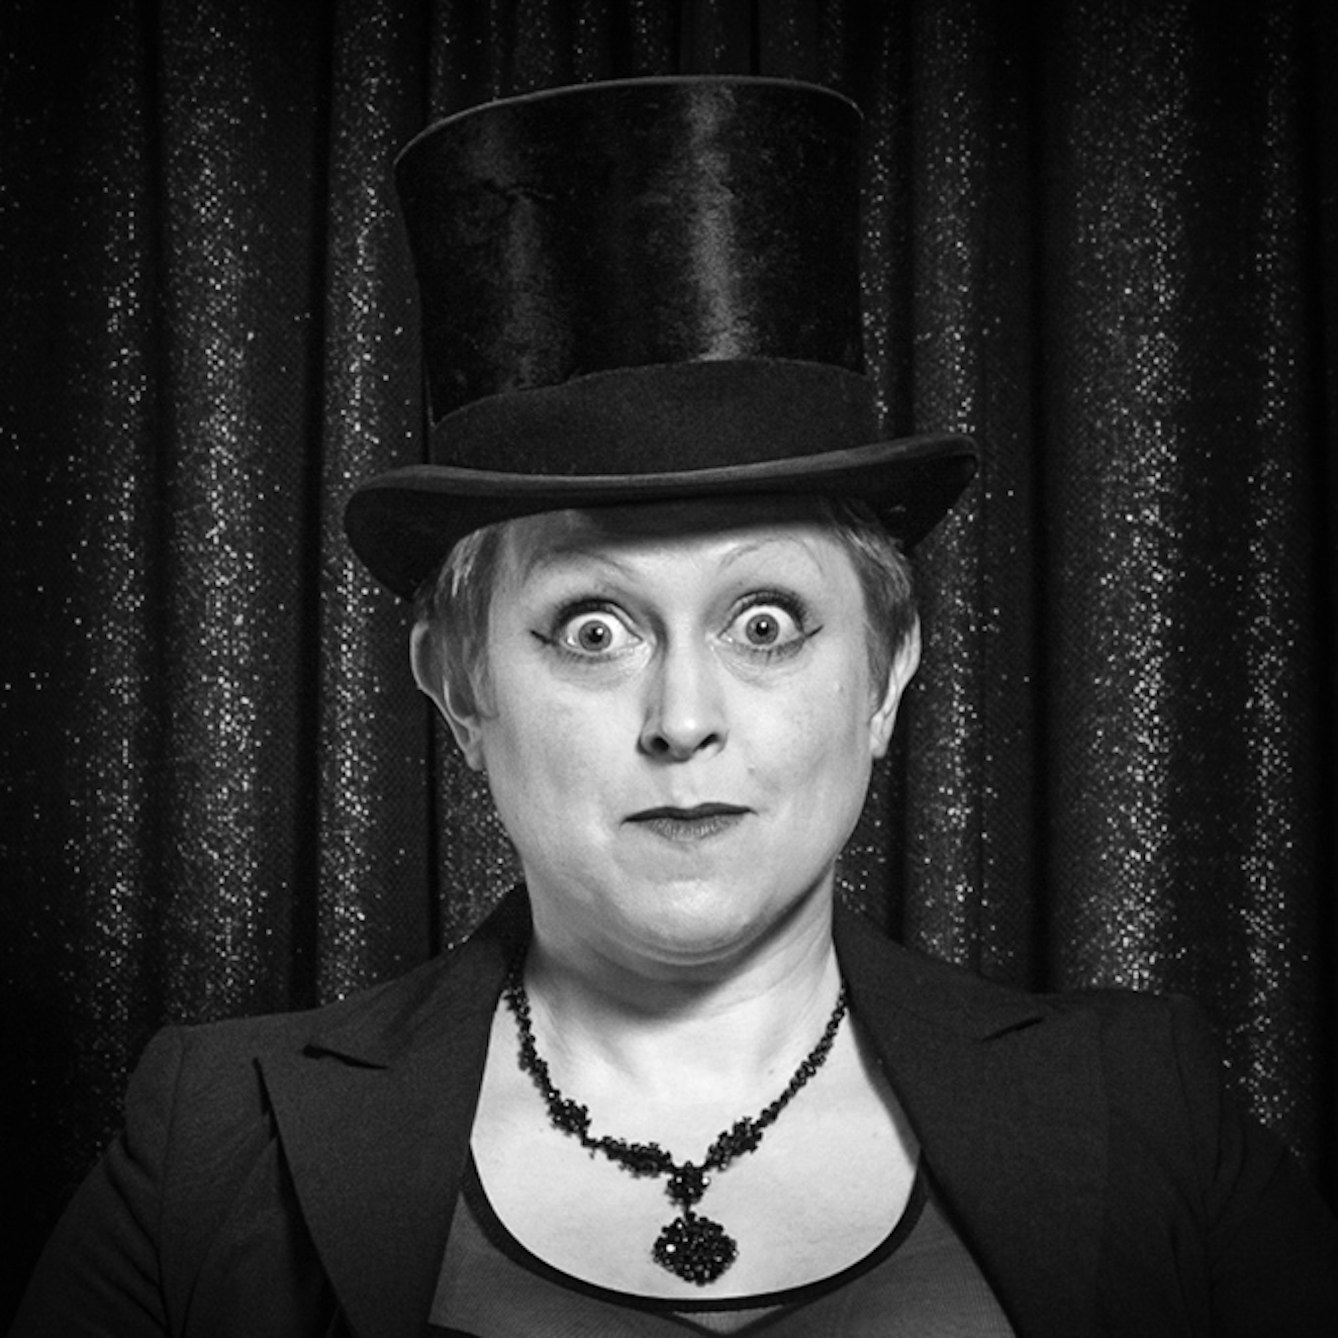 Photographic black and white, head and shoulders portrait of Naomi Paxton in a top hat against a glittery background.